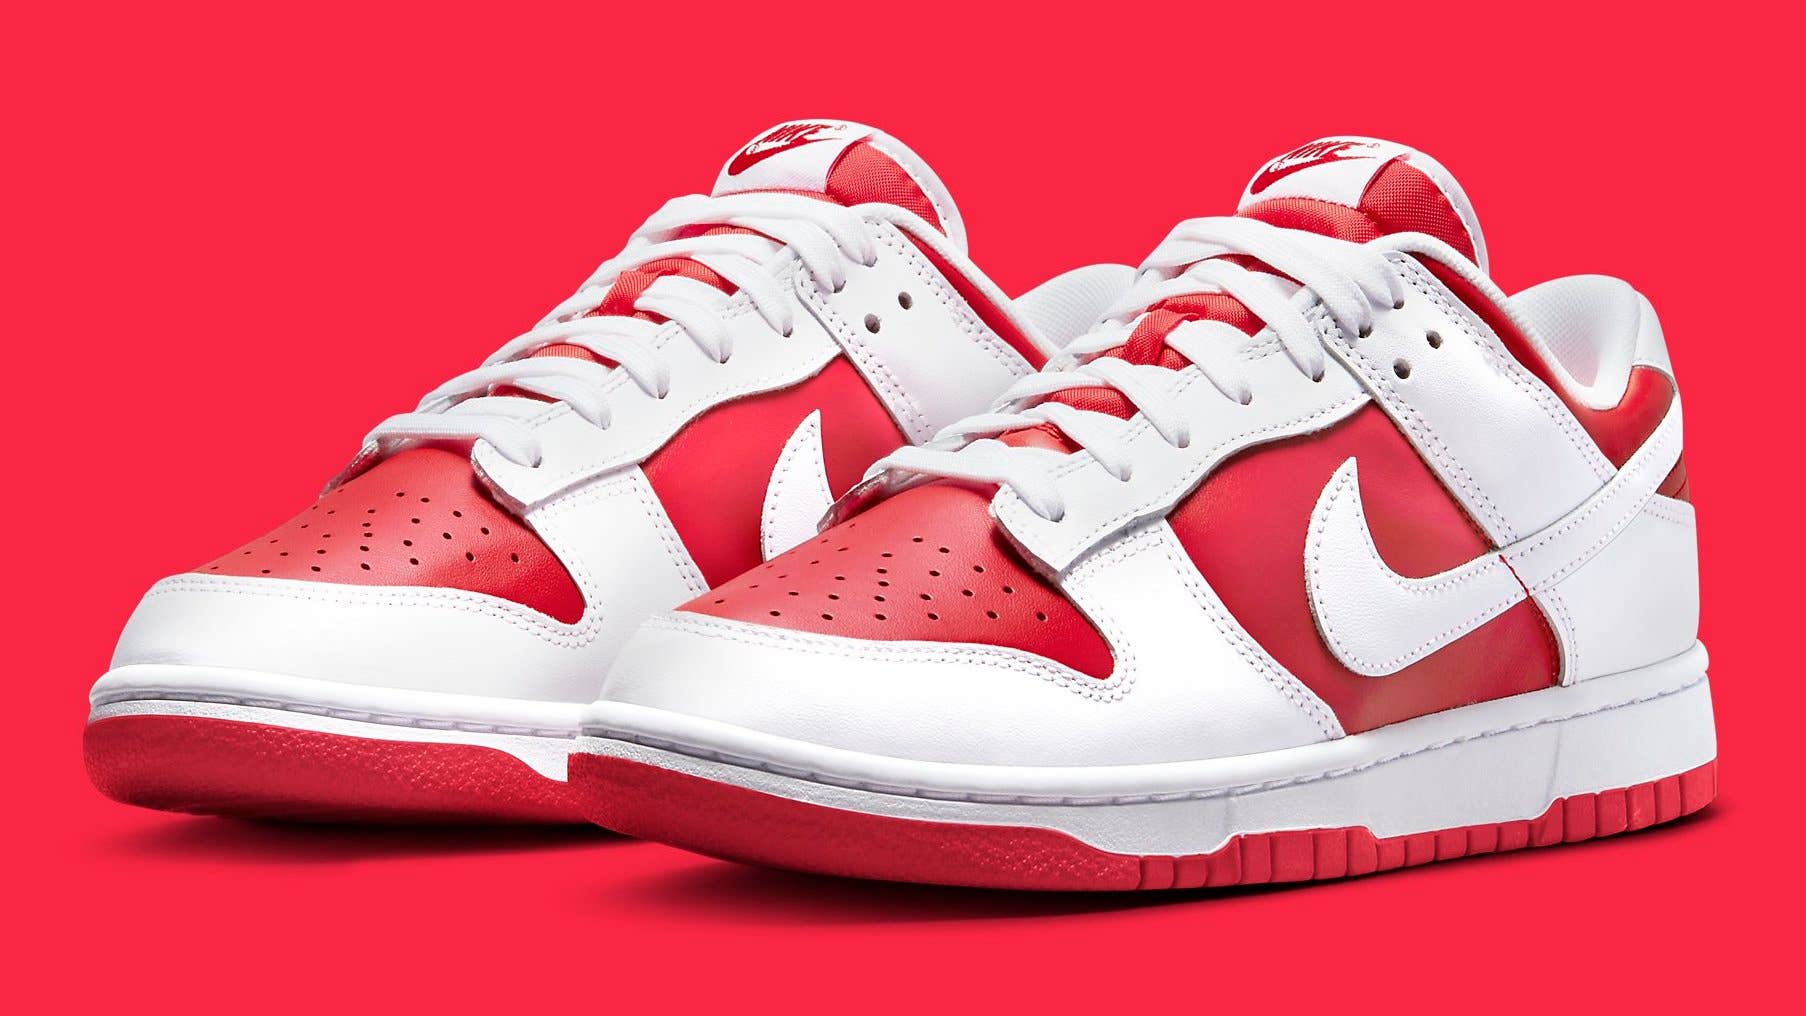 https://img.buzzfeed.com/buzzfeed-static/complex/images/Y19jcm9wLGhfMTAxNix3XzE4MDYseF8xMDAseV82NDM=/rfienqxubkgy8ps4xt1i/nike-dunk-low-championship-red-dd1391-600-release-date-pair.jpg?output-format=jpg&output-quality=auto